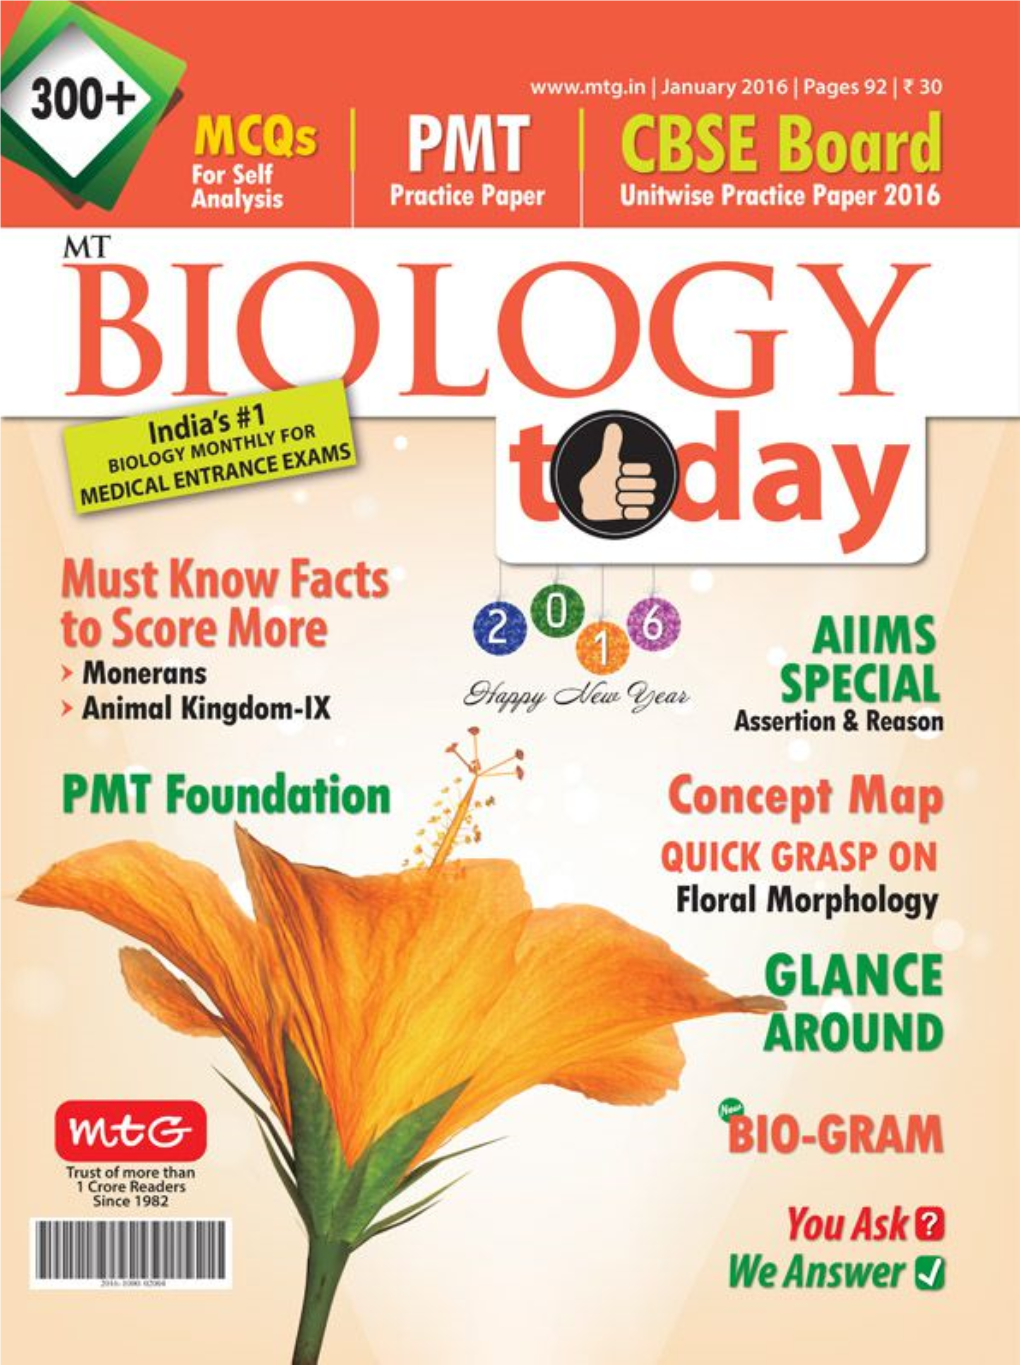 Biology Today 330 600 775 43 High Yield Facts-Botany Monerans (XI) Combined Subscription Rates 1 Yr